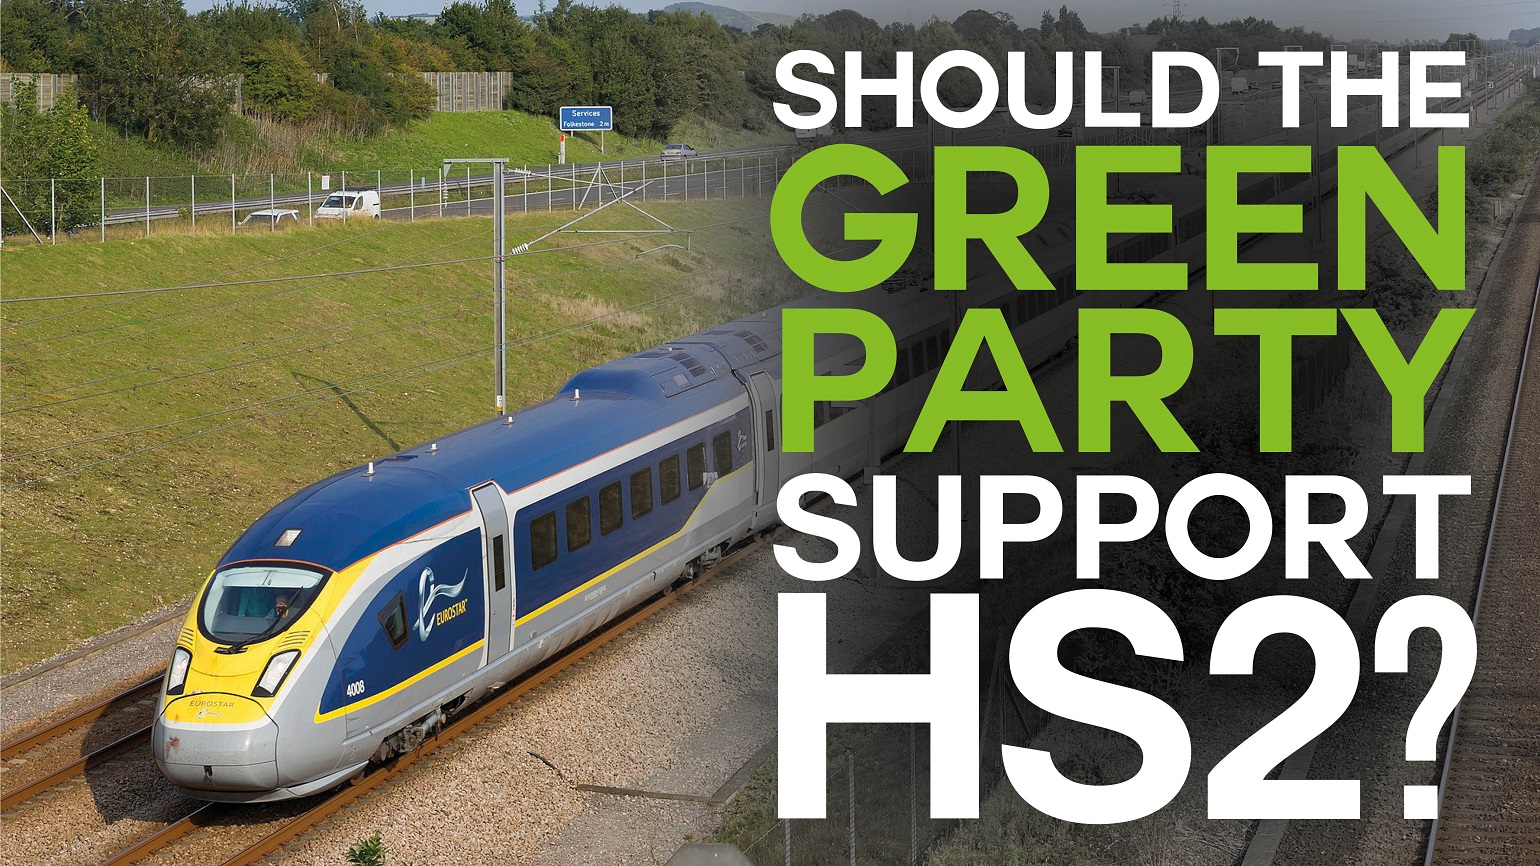 A photo of a HS1 train with text overlaid reading "Should the Green Party support HS2?"